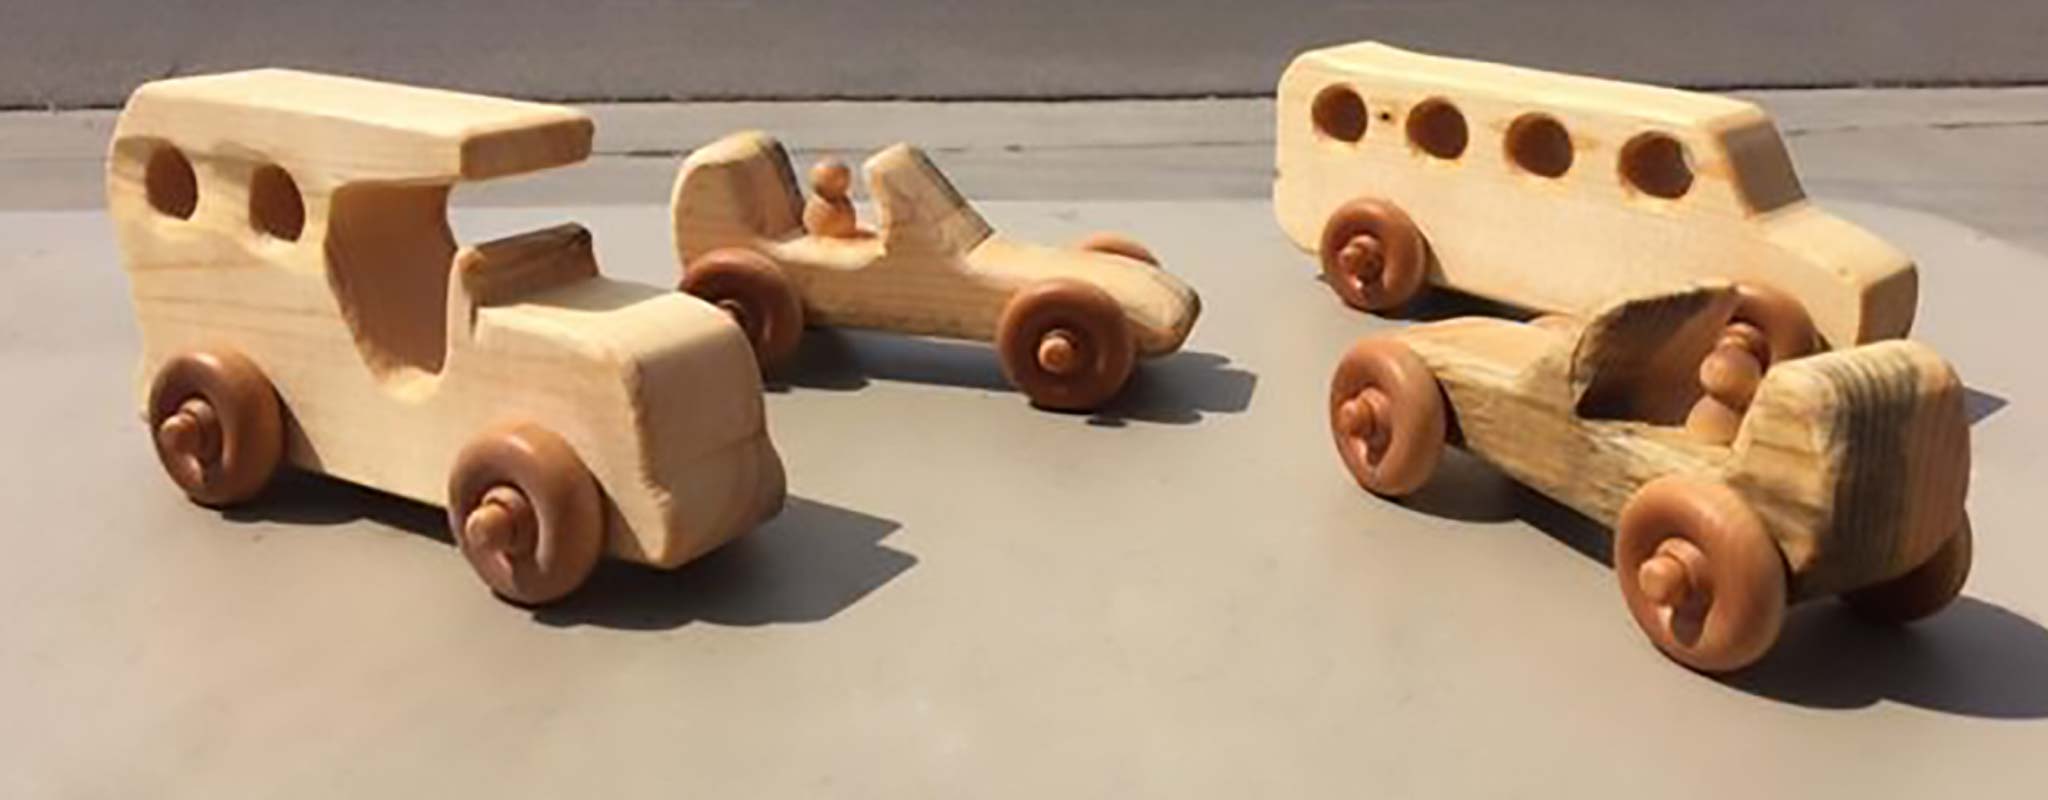 A set of hand carved wood cars.